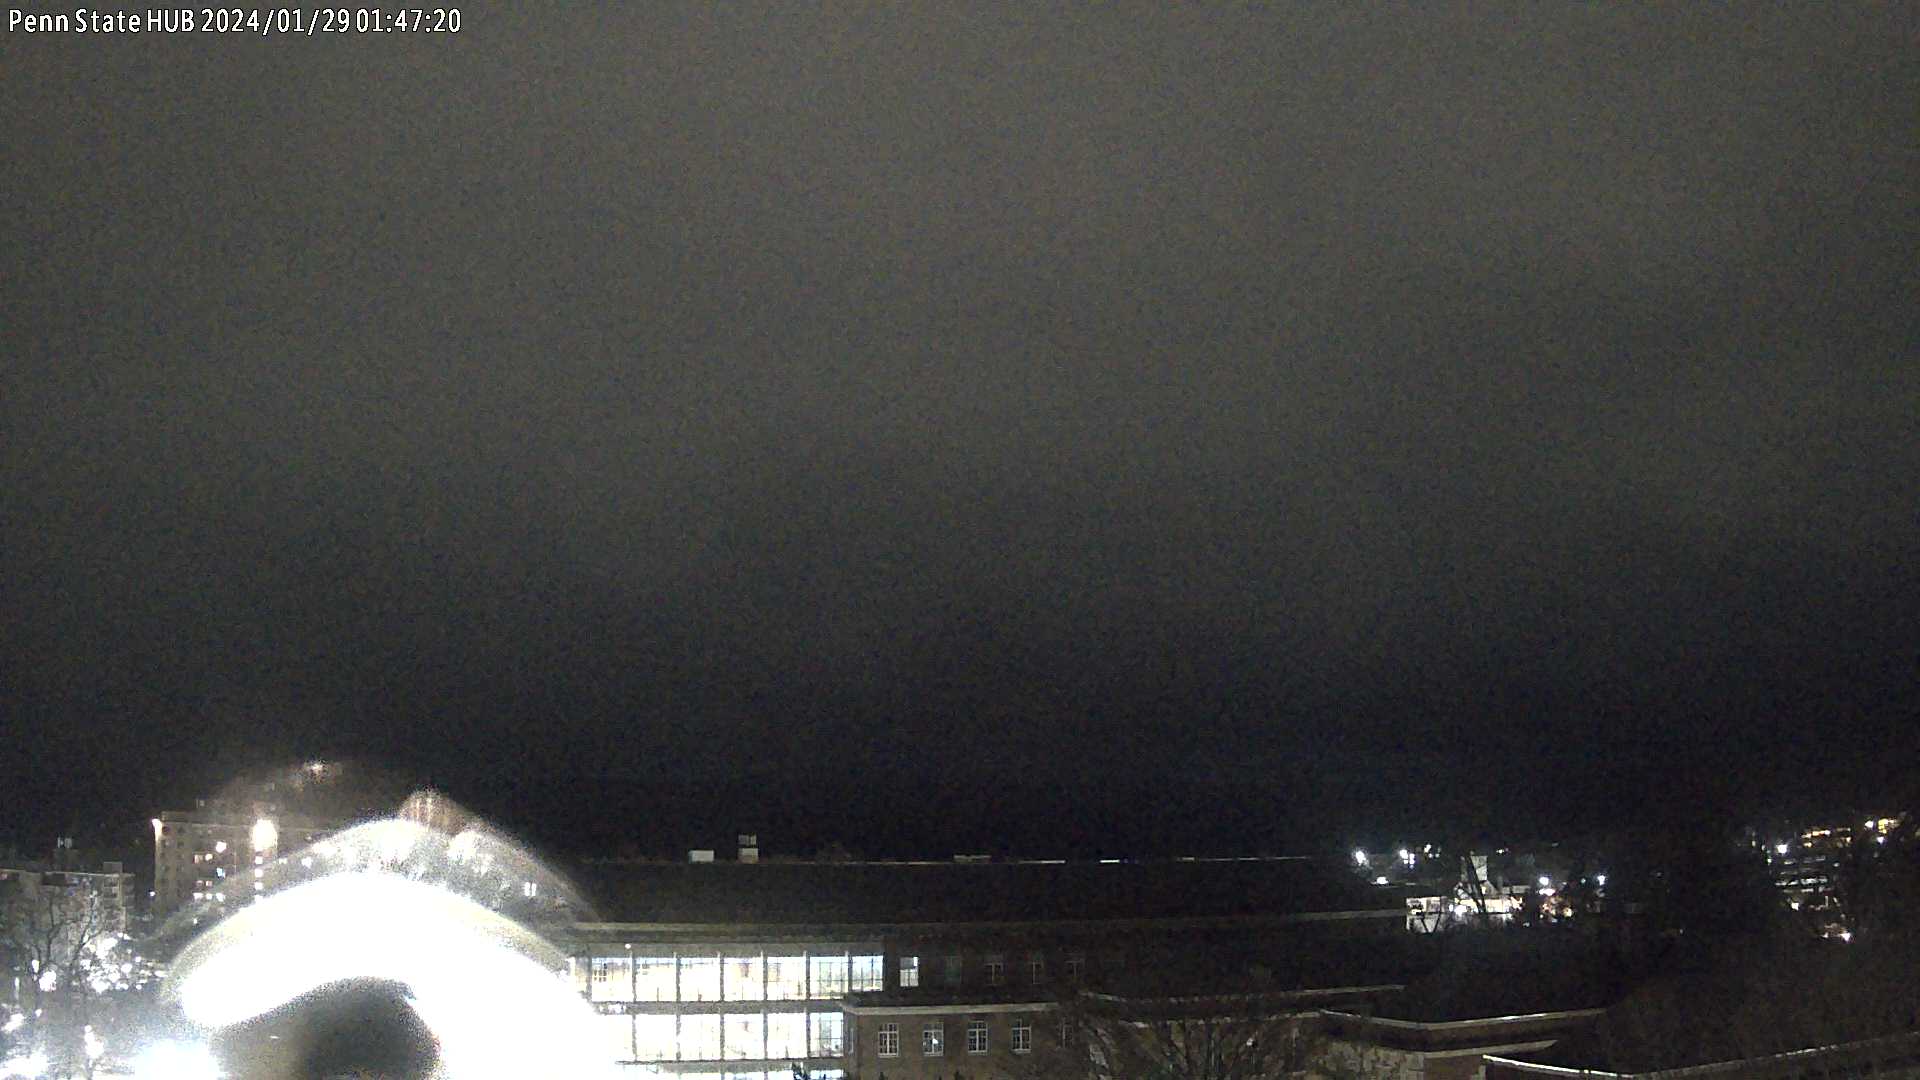  WeatherSTEM View From The HUB Camera HUBWeatherSTEM in Centre County, Pennsylvania PA at Penn State HUB